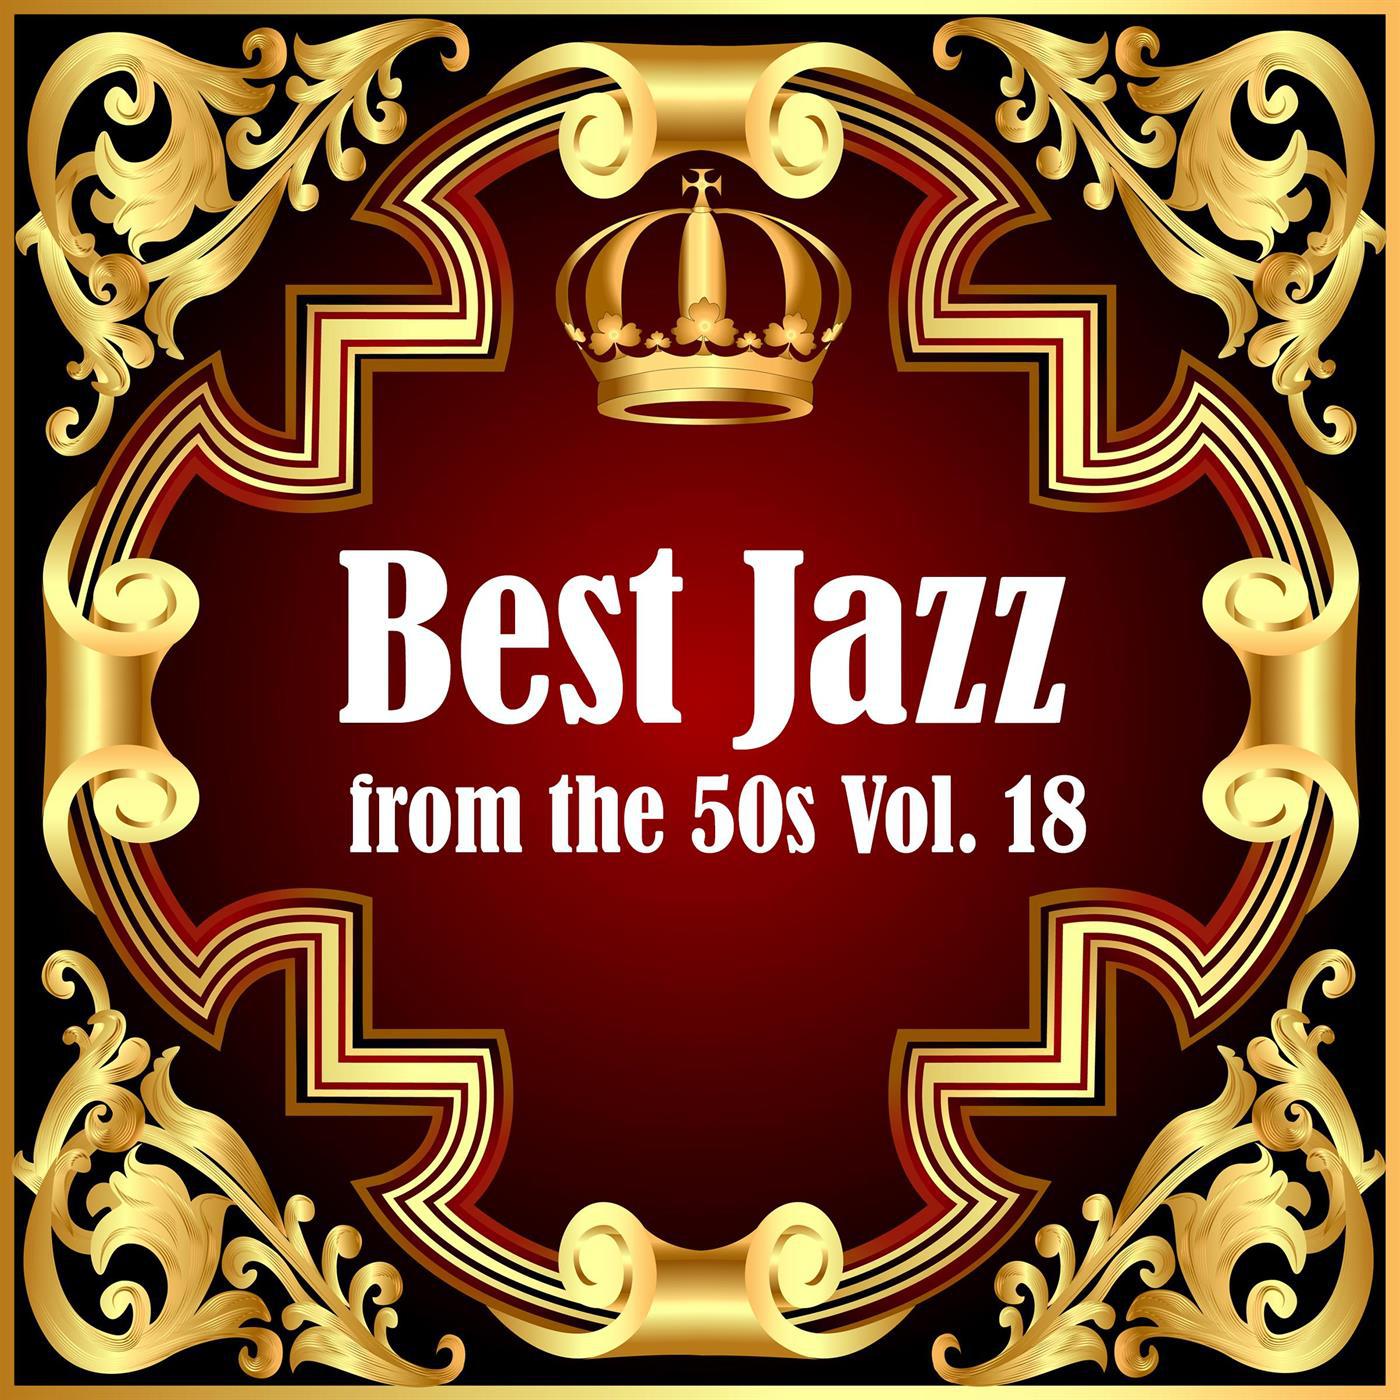 Best Jazz from the 50s Vol. 18专辑